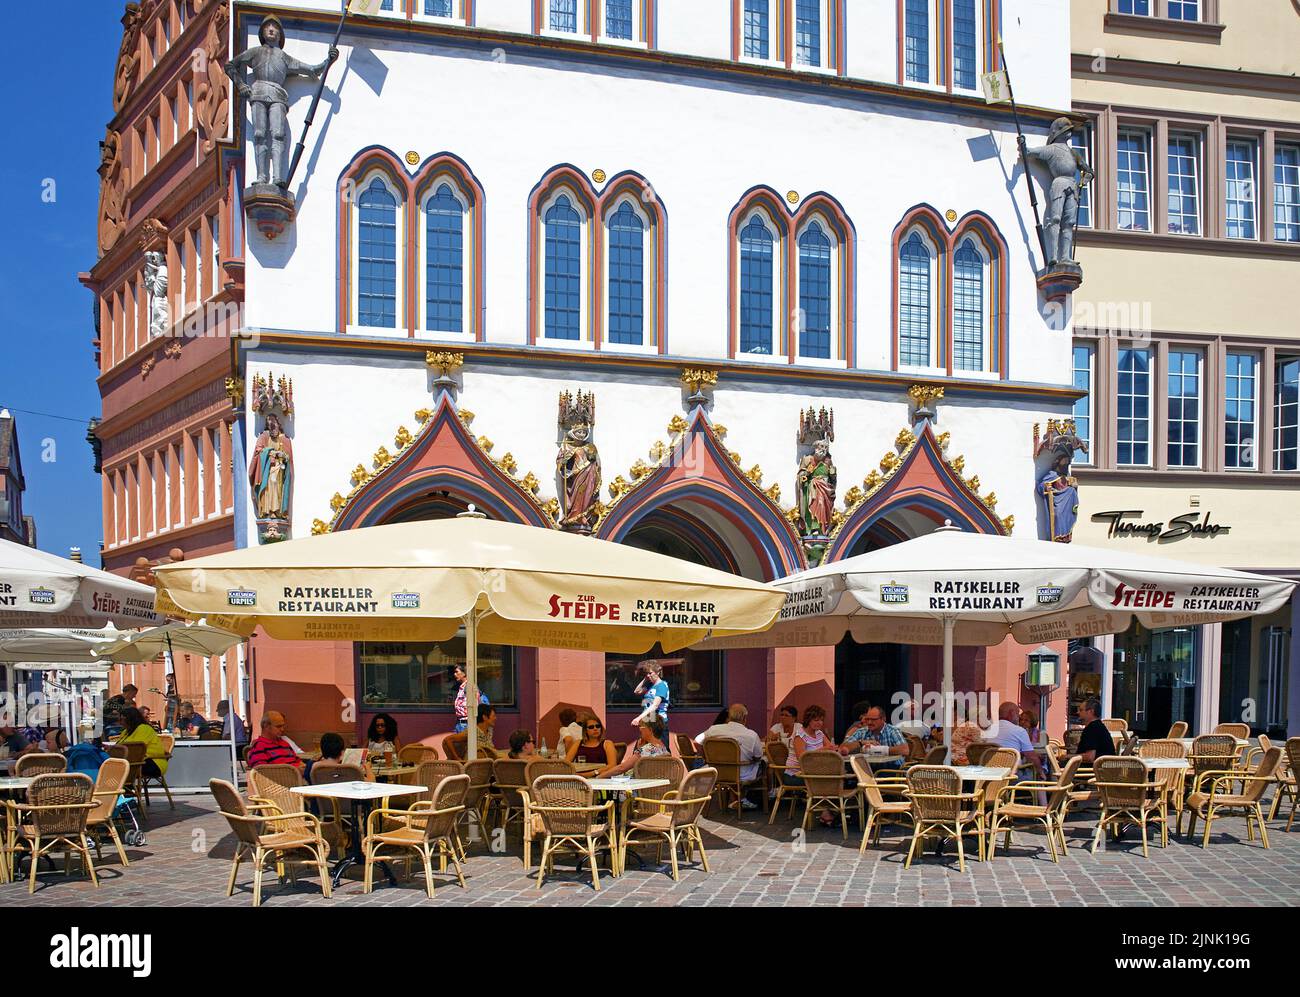 Ratskeller (Council house) with outside gastronomy, Trier, Rhineland-Palatinate, Germany, Europe Stock Photo